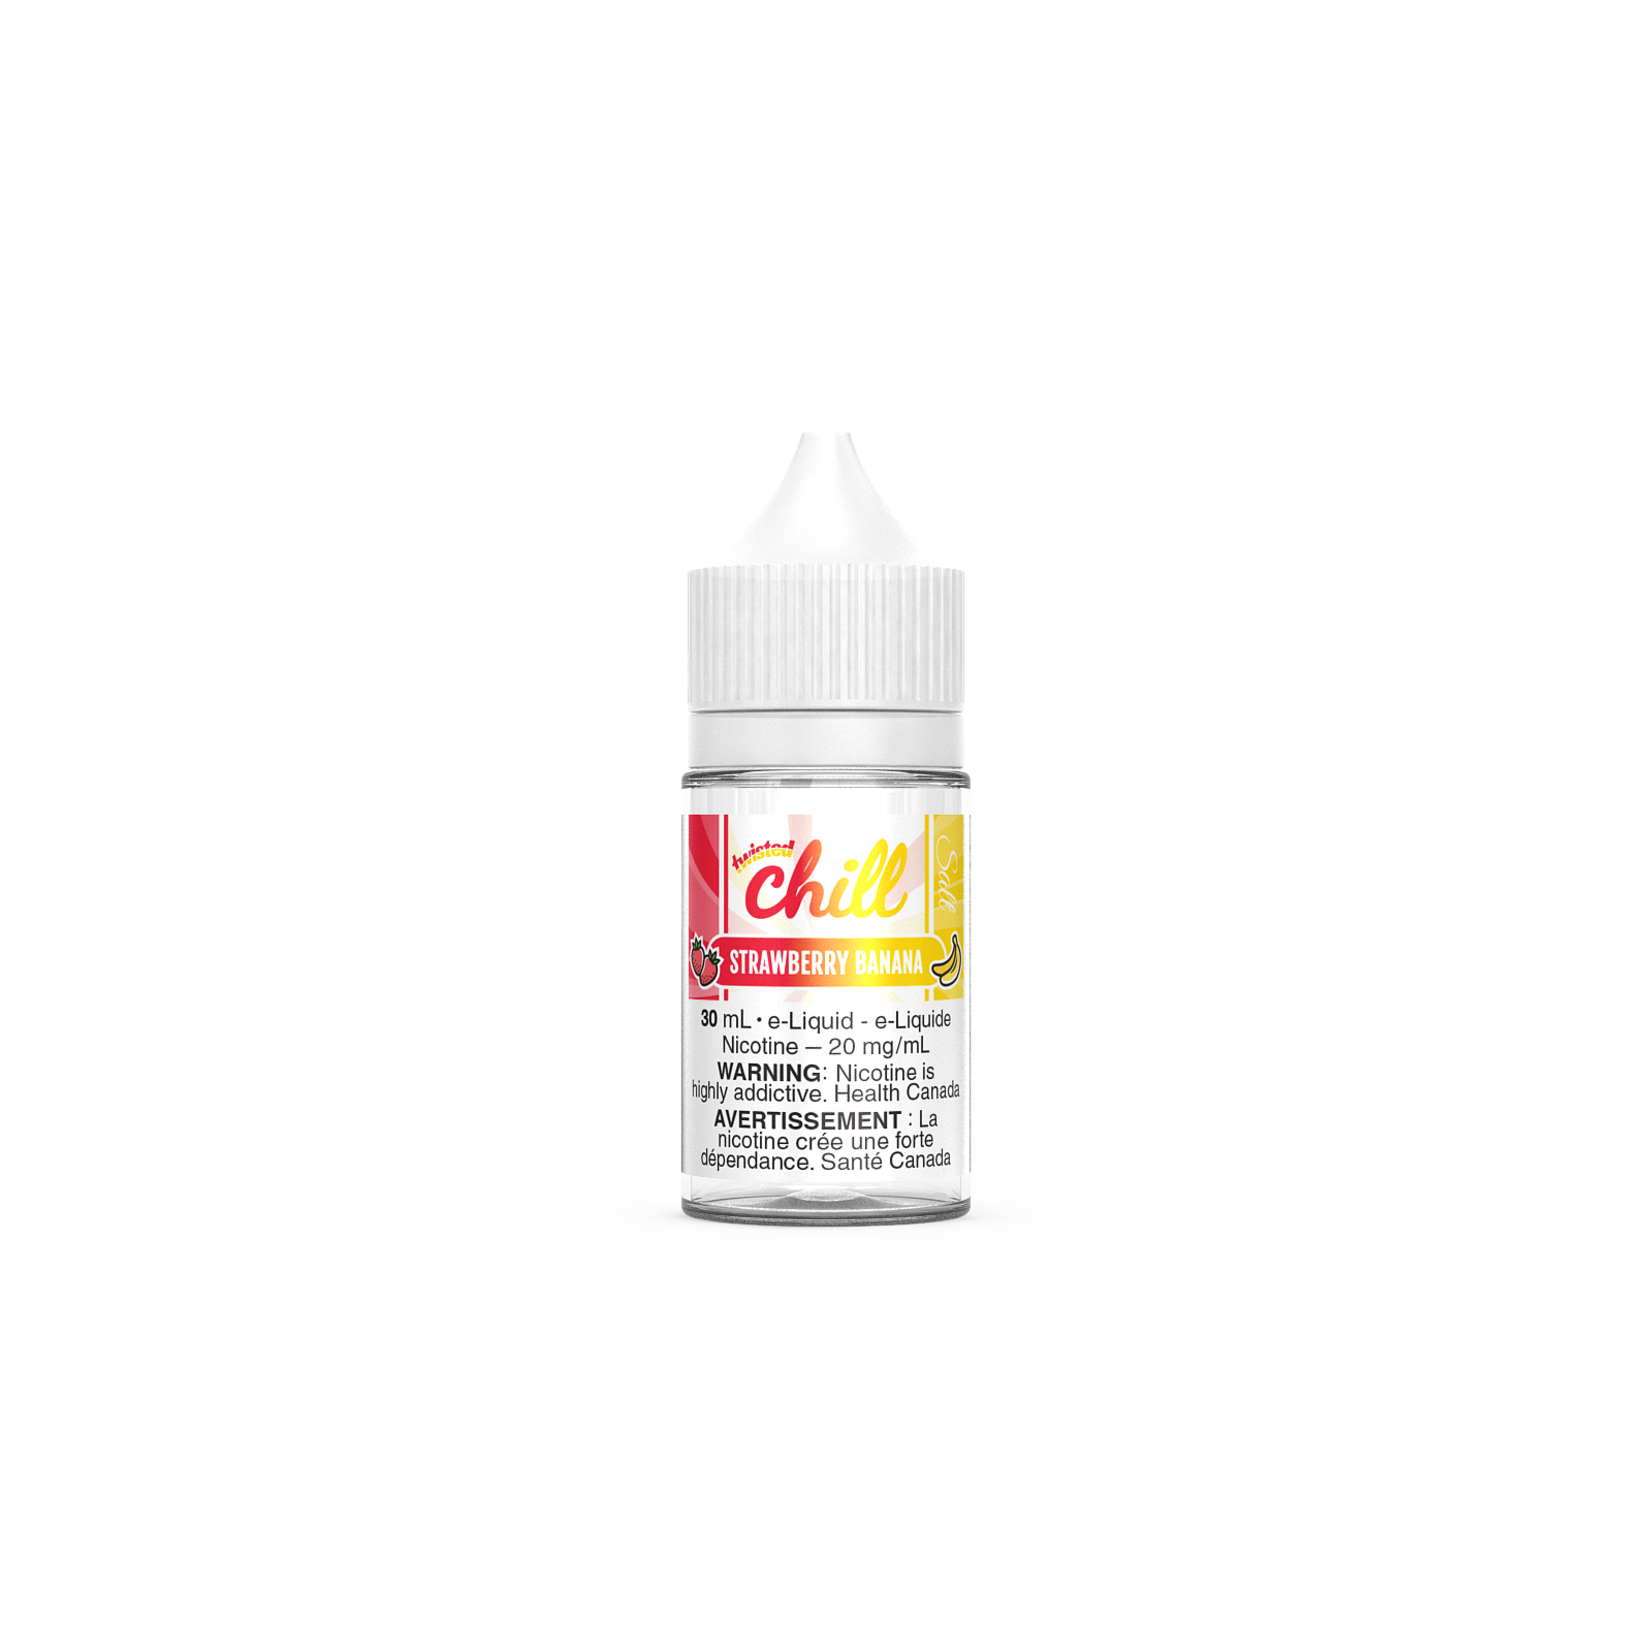 CHILL TWISTED Chill Twisted - SALT NICOTINE